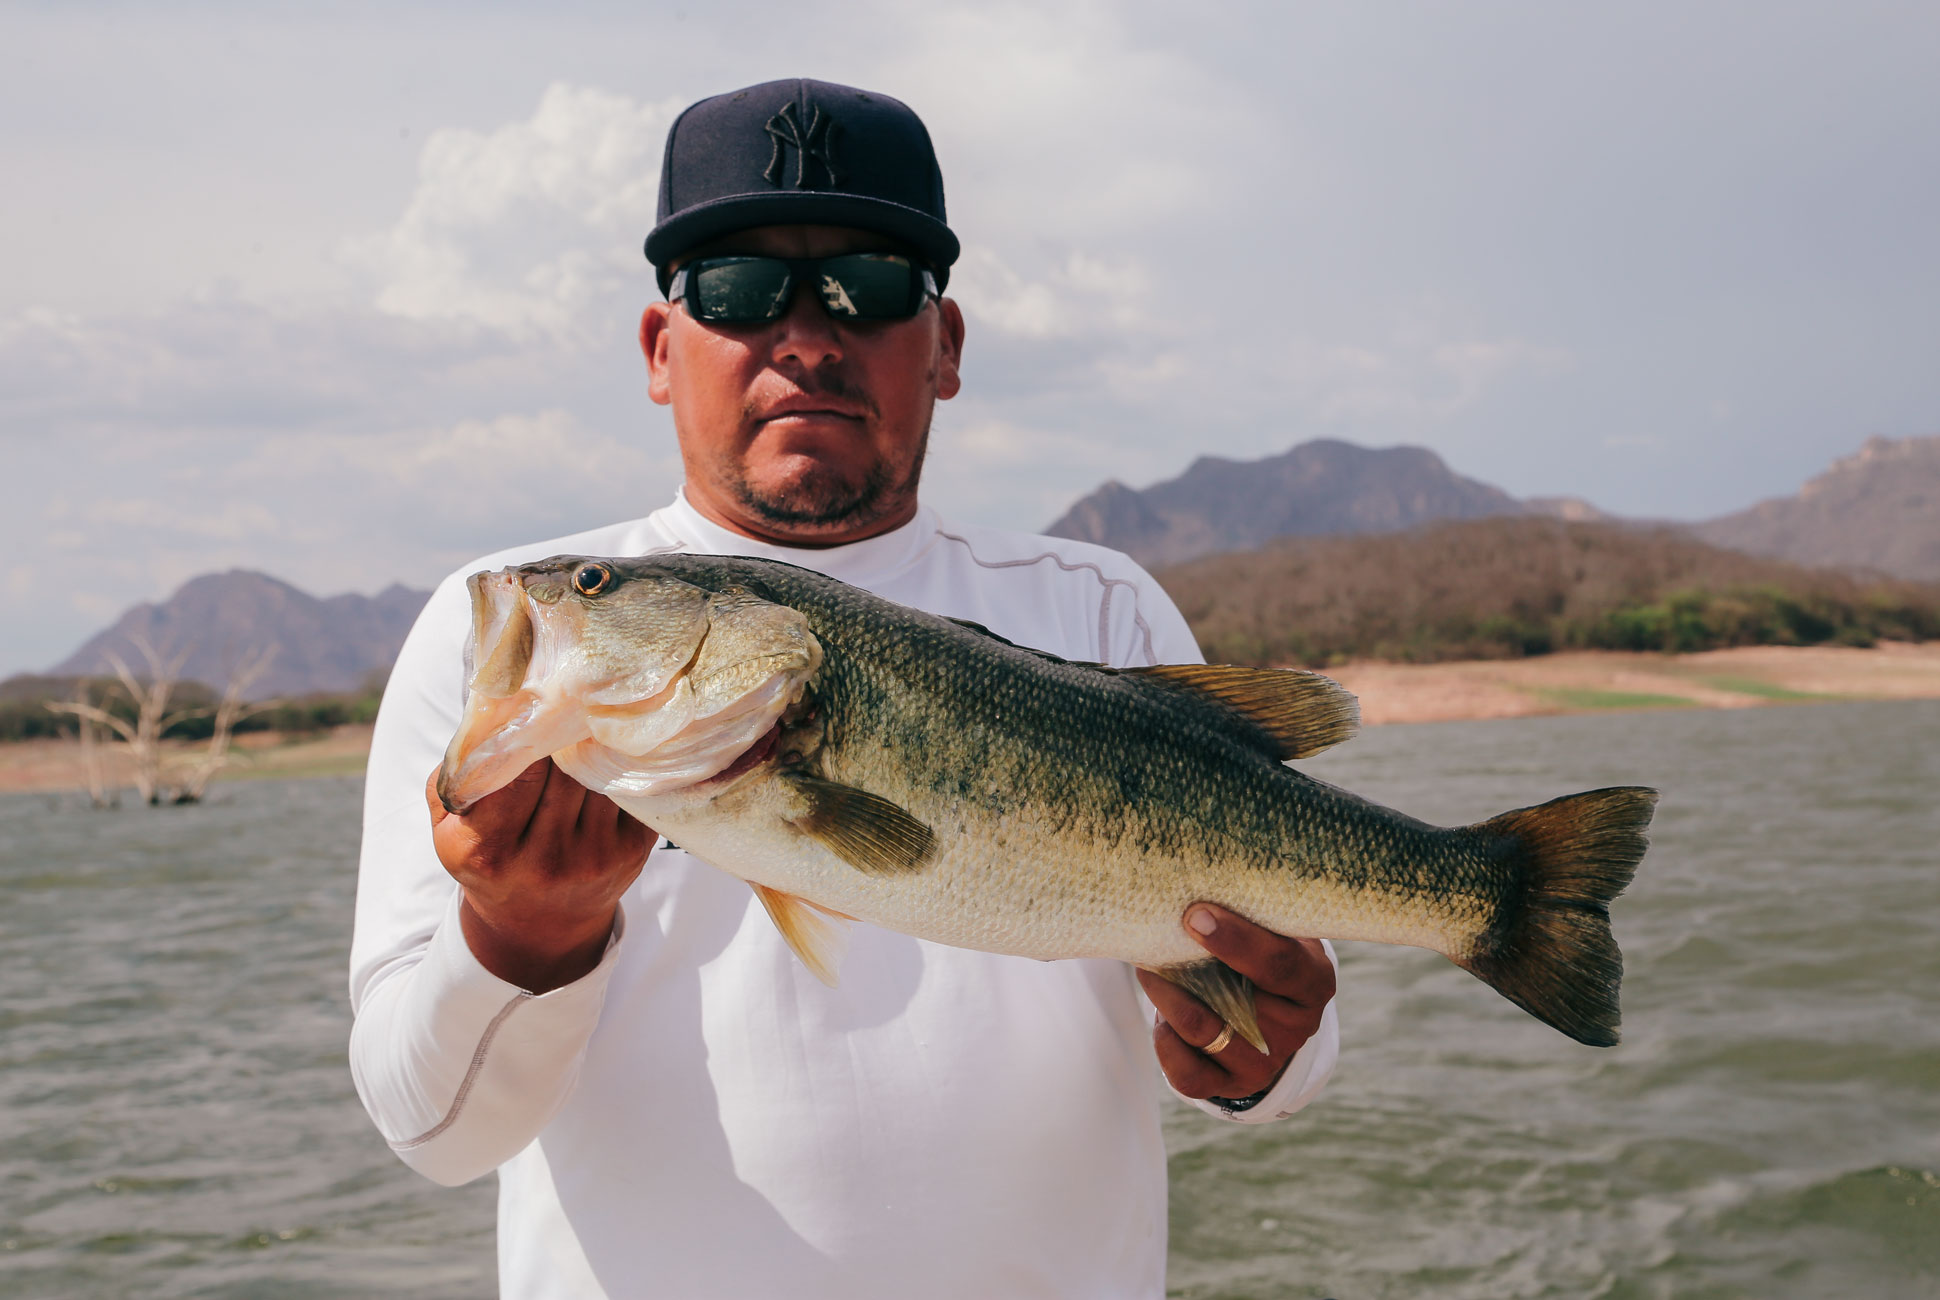 Juan, 30, makes his living as a guide on Lake El Salto. The Mexican government flooded the valley when he was just a child to create a lake for farming tilapia; when I ask him where he grew up, he pointed to the water about 50 yards from where we were casting.